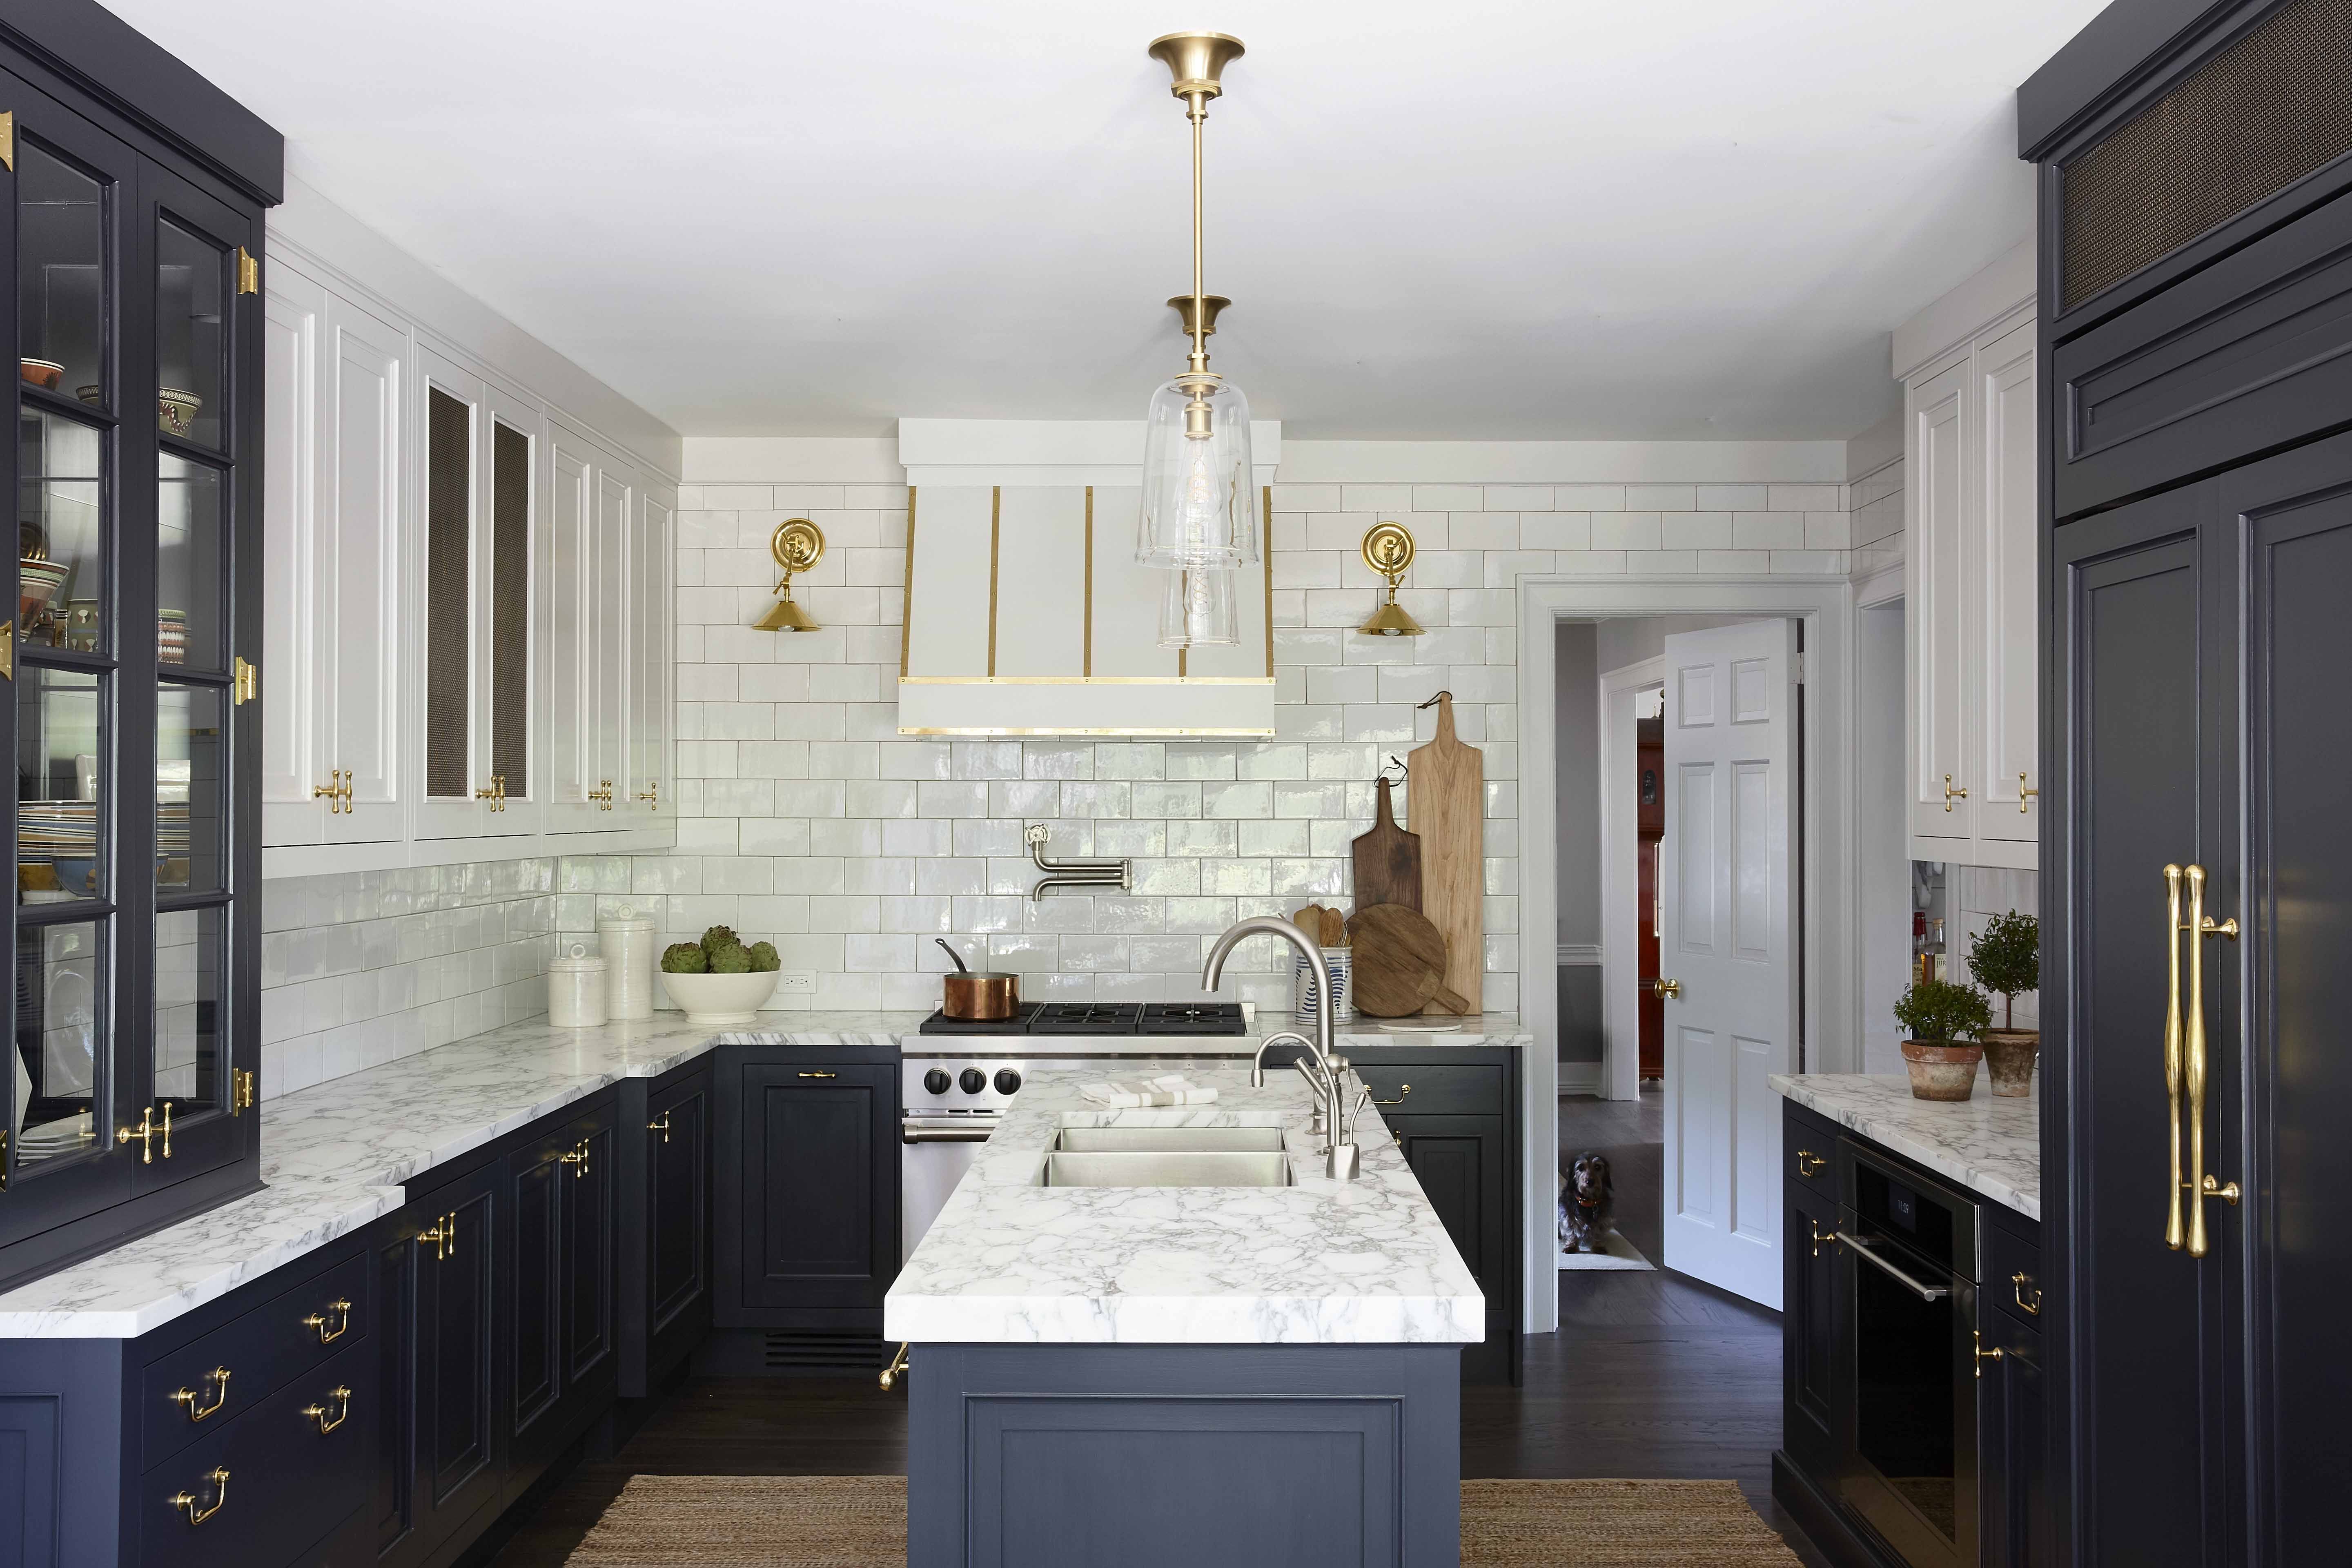 The Dos and Don'ts of Kitchen Design: 11 Great Tips